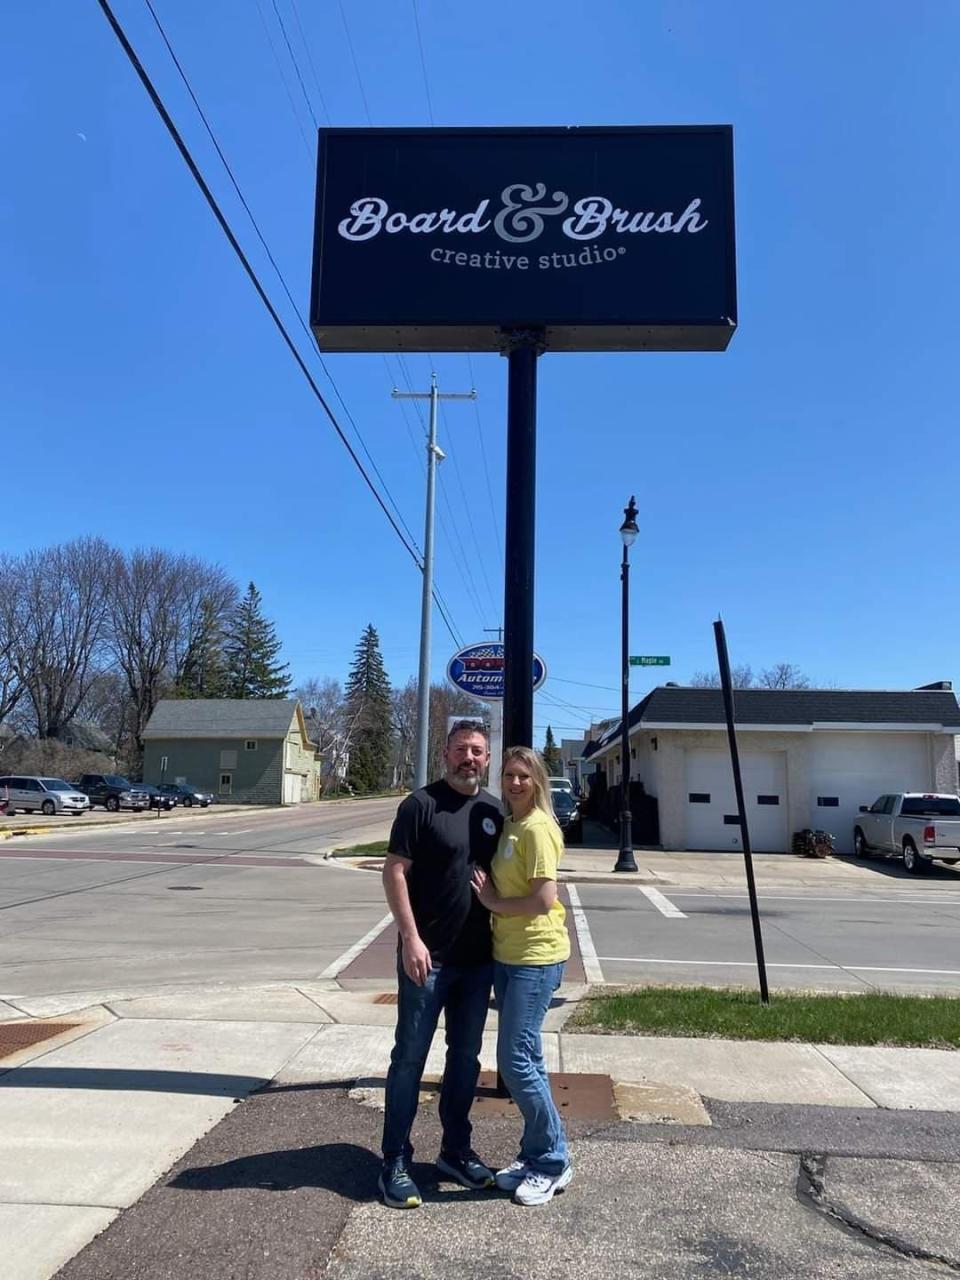 Tanya and Andy Woltmann pose in front of the Board & Brush sign outside of their studio, 112 E. Fourth St. in Marshfield.